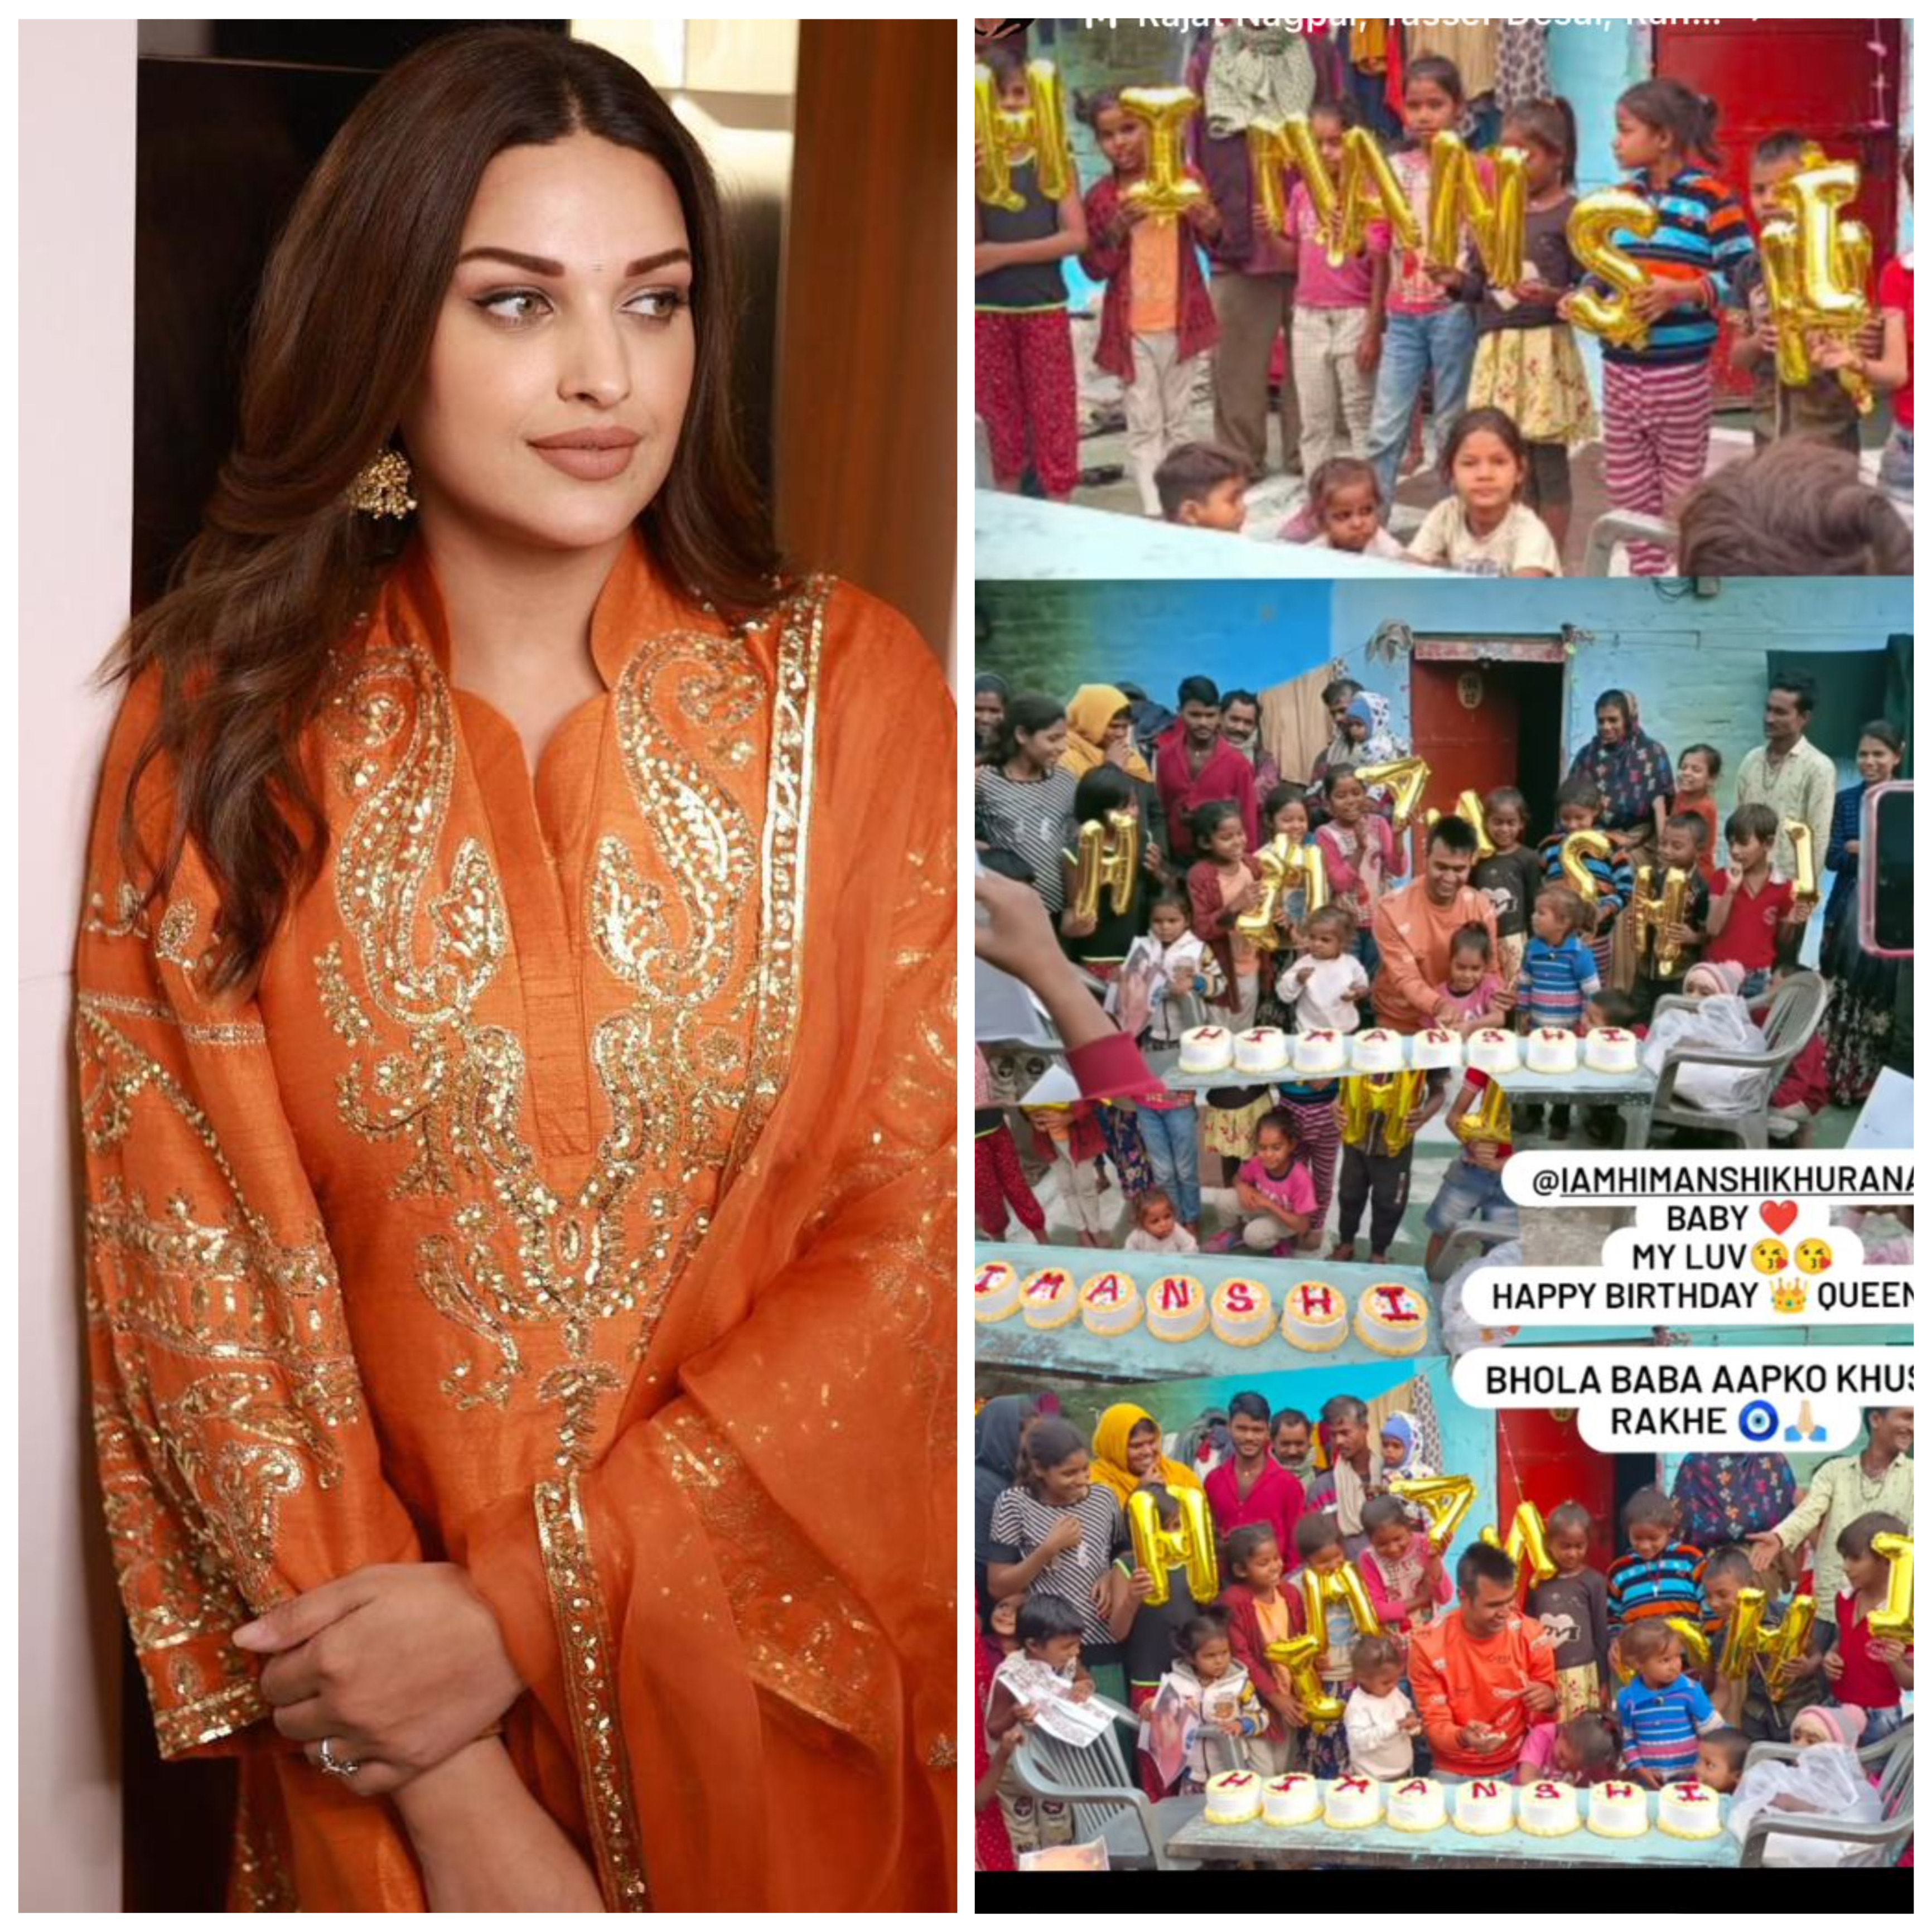 Himanshi Khurana’s fans distribute food to the needy on the occasion of her birthday; check out the pictures!